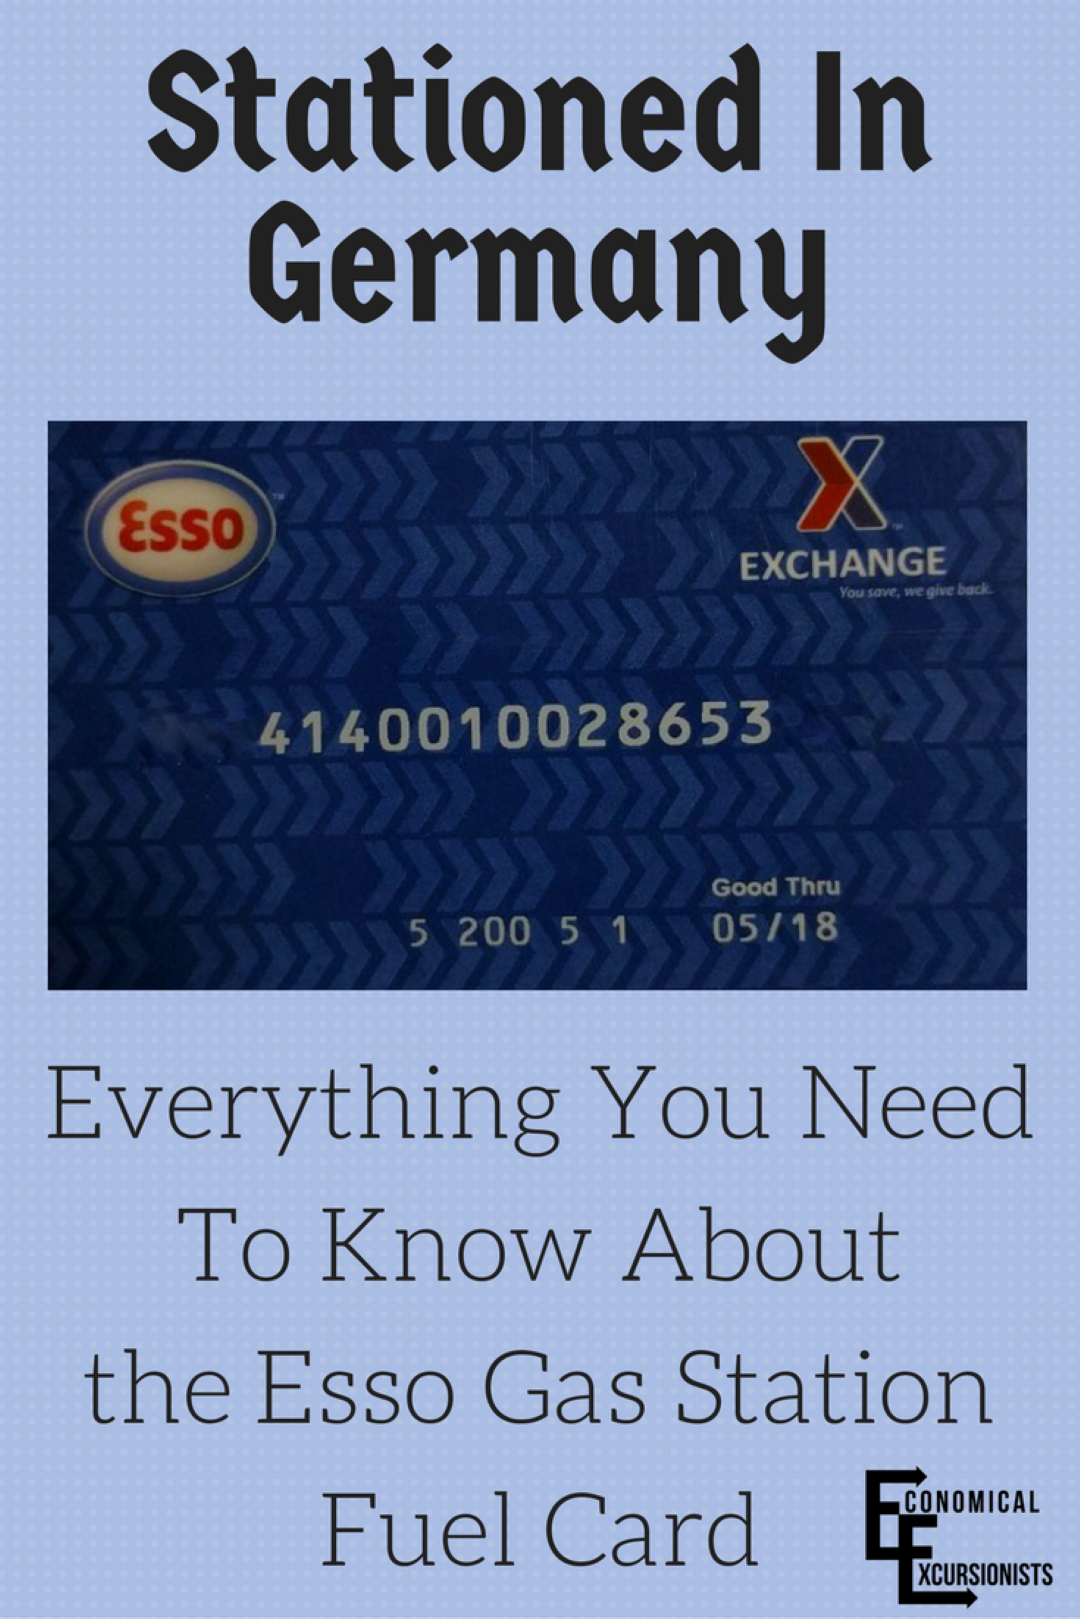 AWESOME info on the Esso Gas Station Fuel Card for those stationed in Germany!